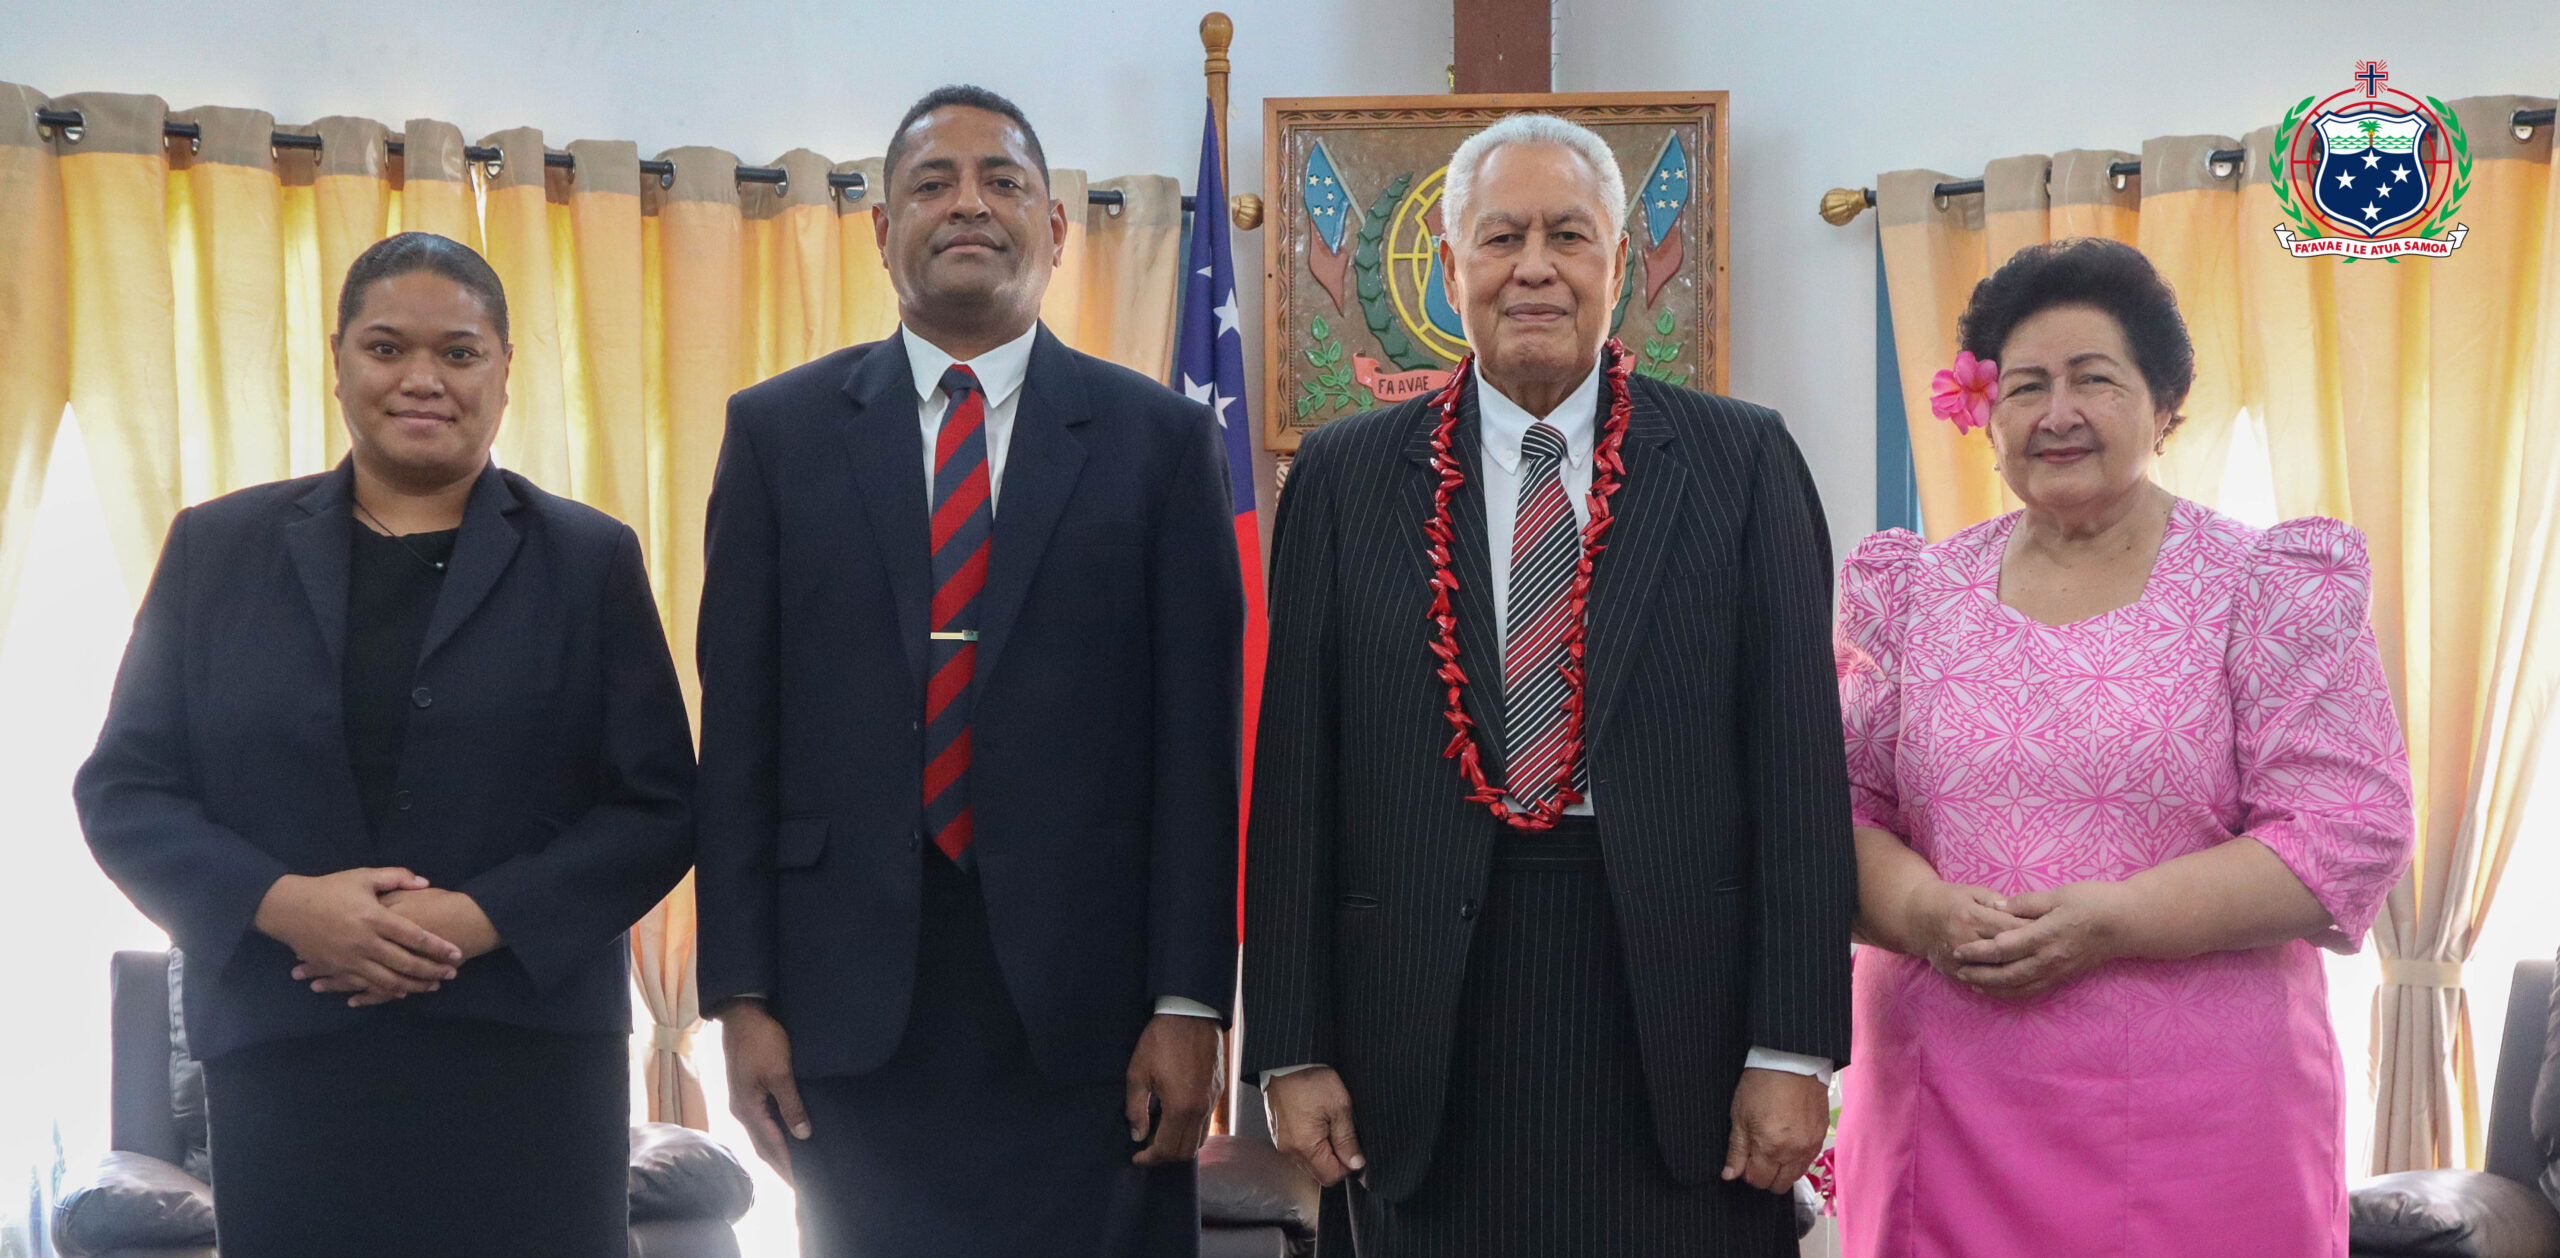 PRESENTATION OF CREDENTIALS OF THE HIGH COMMISSSIONER OF THE REPUBLIC OF FIJI TO THE INDEPENDENT STATE OF SAMOA